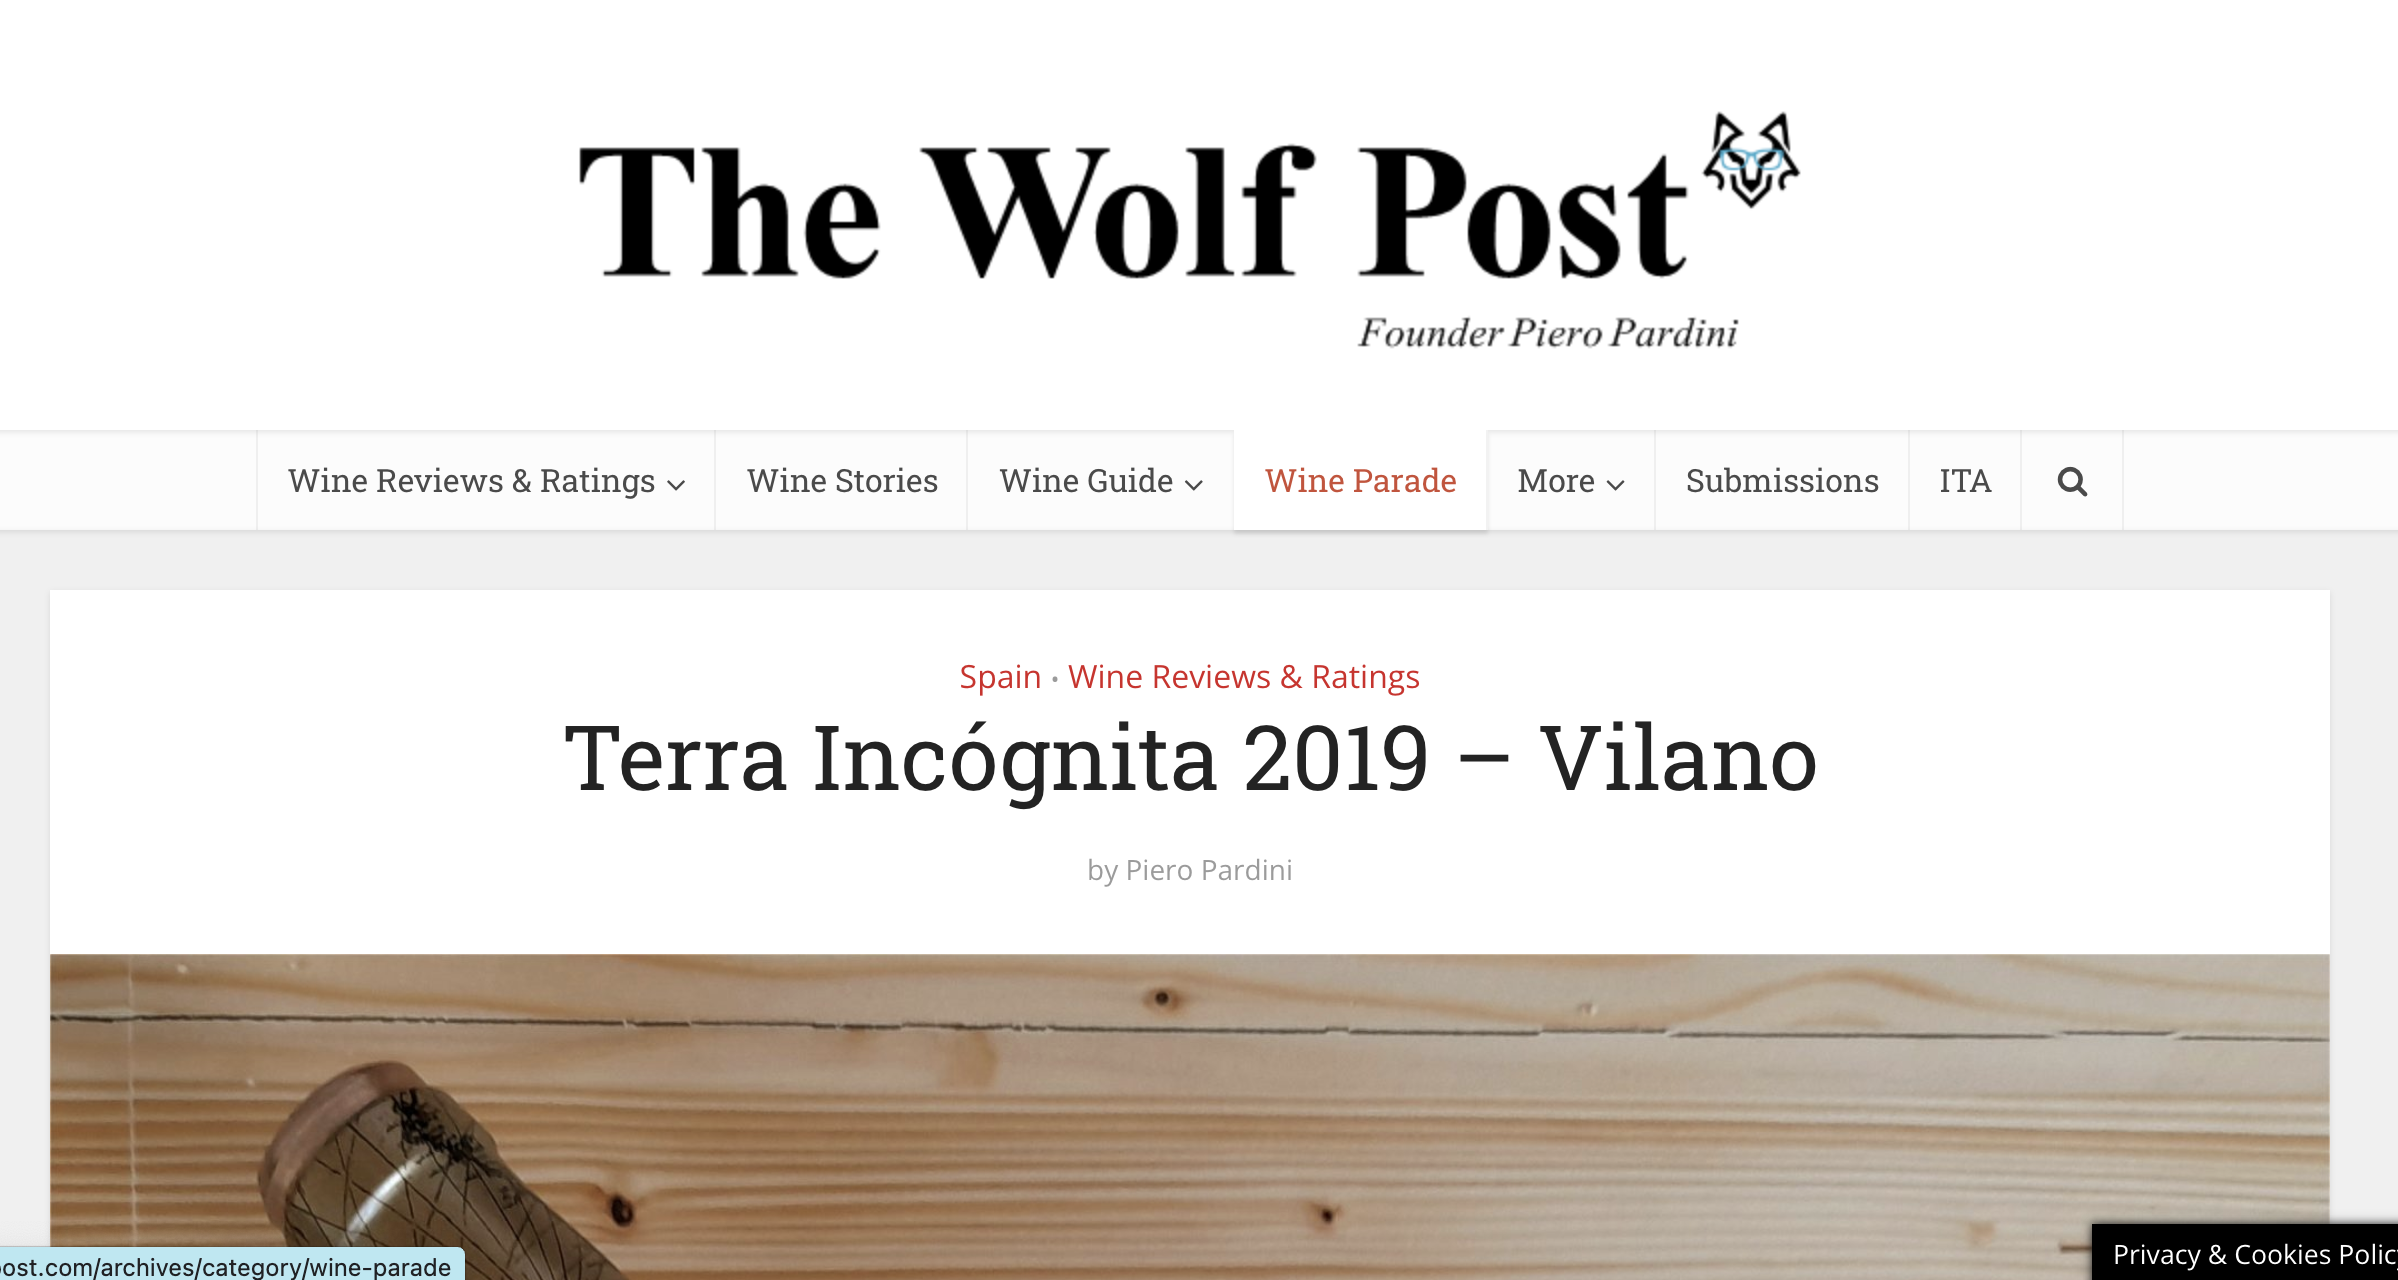 Terra Incognita 2019 chosen by THE WOOLF POST